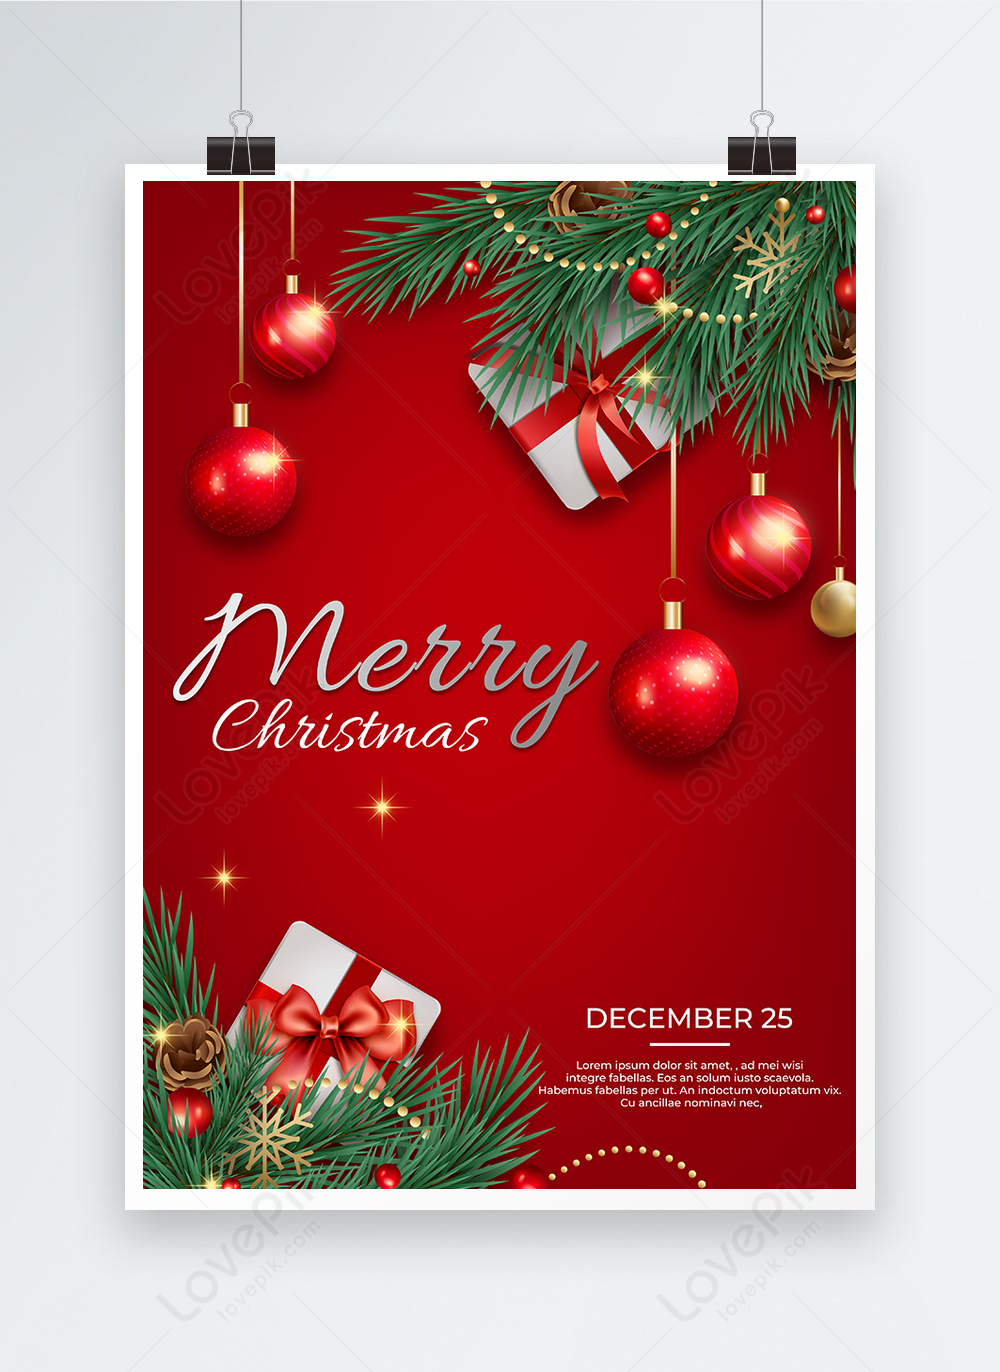 Christmas gift holiday poster template image_picture free download ...